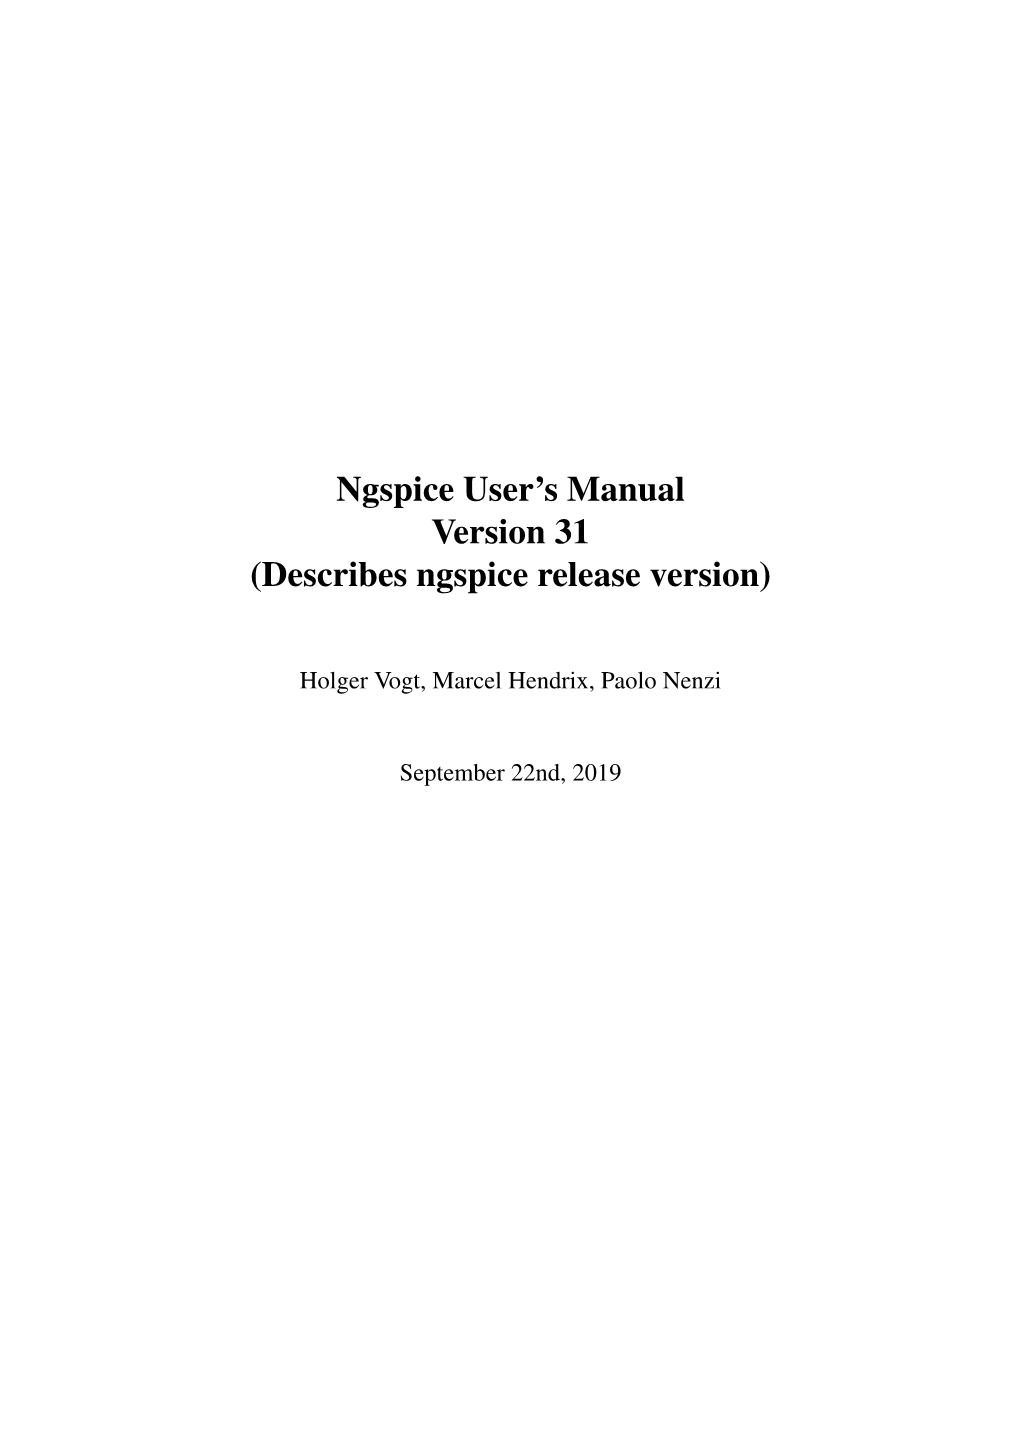 Ngspice User's Manual (Version 31)